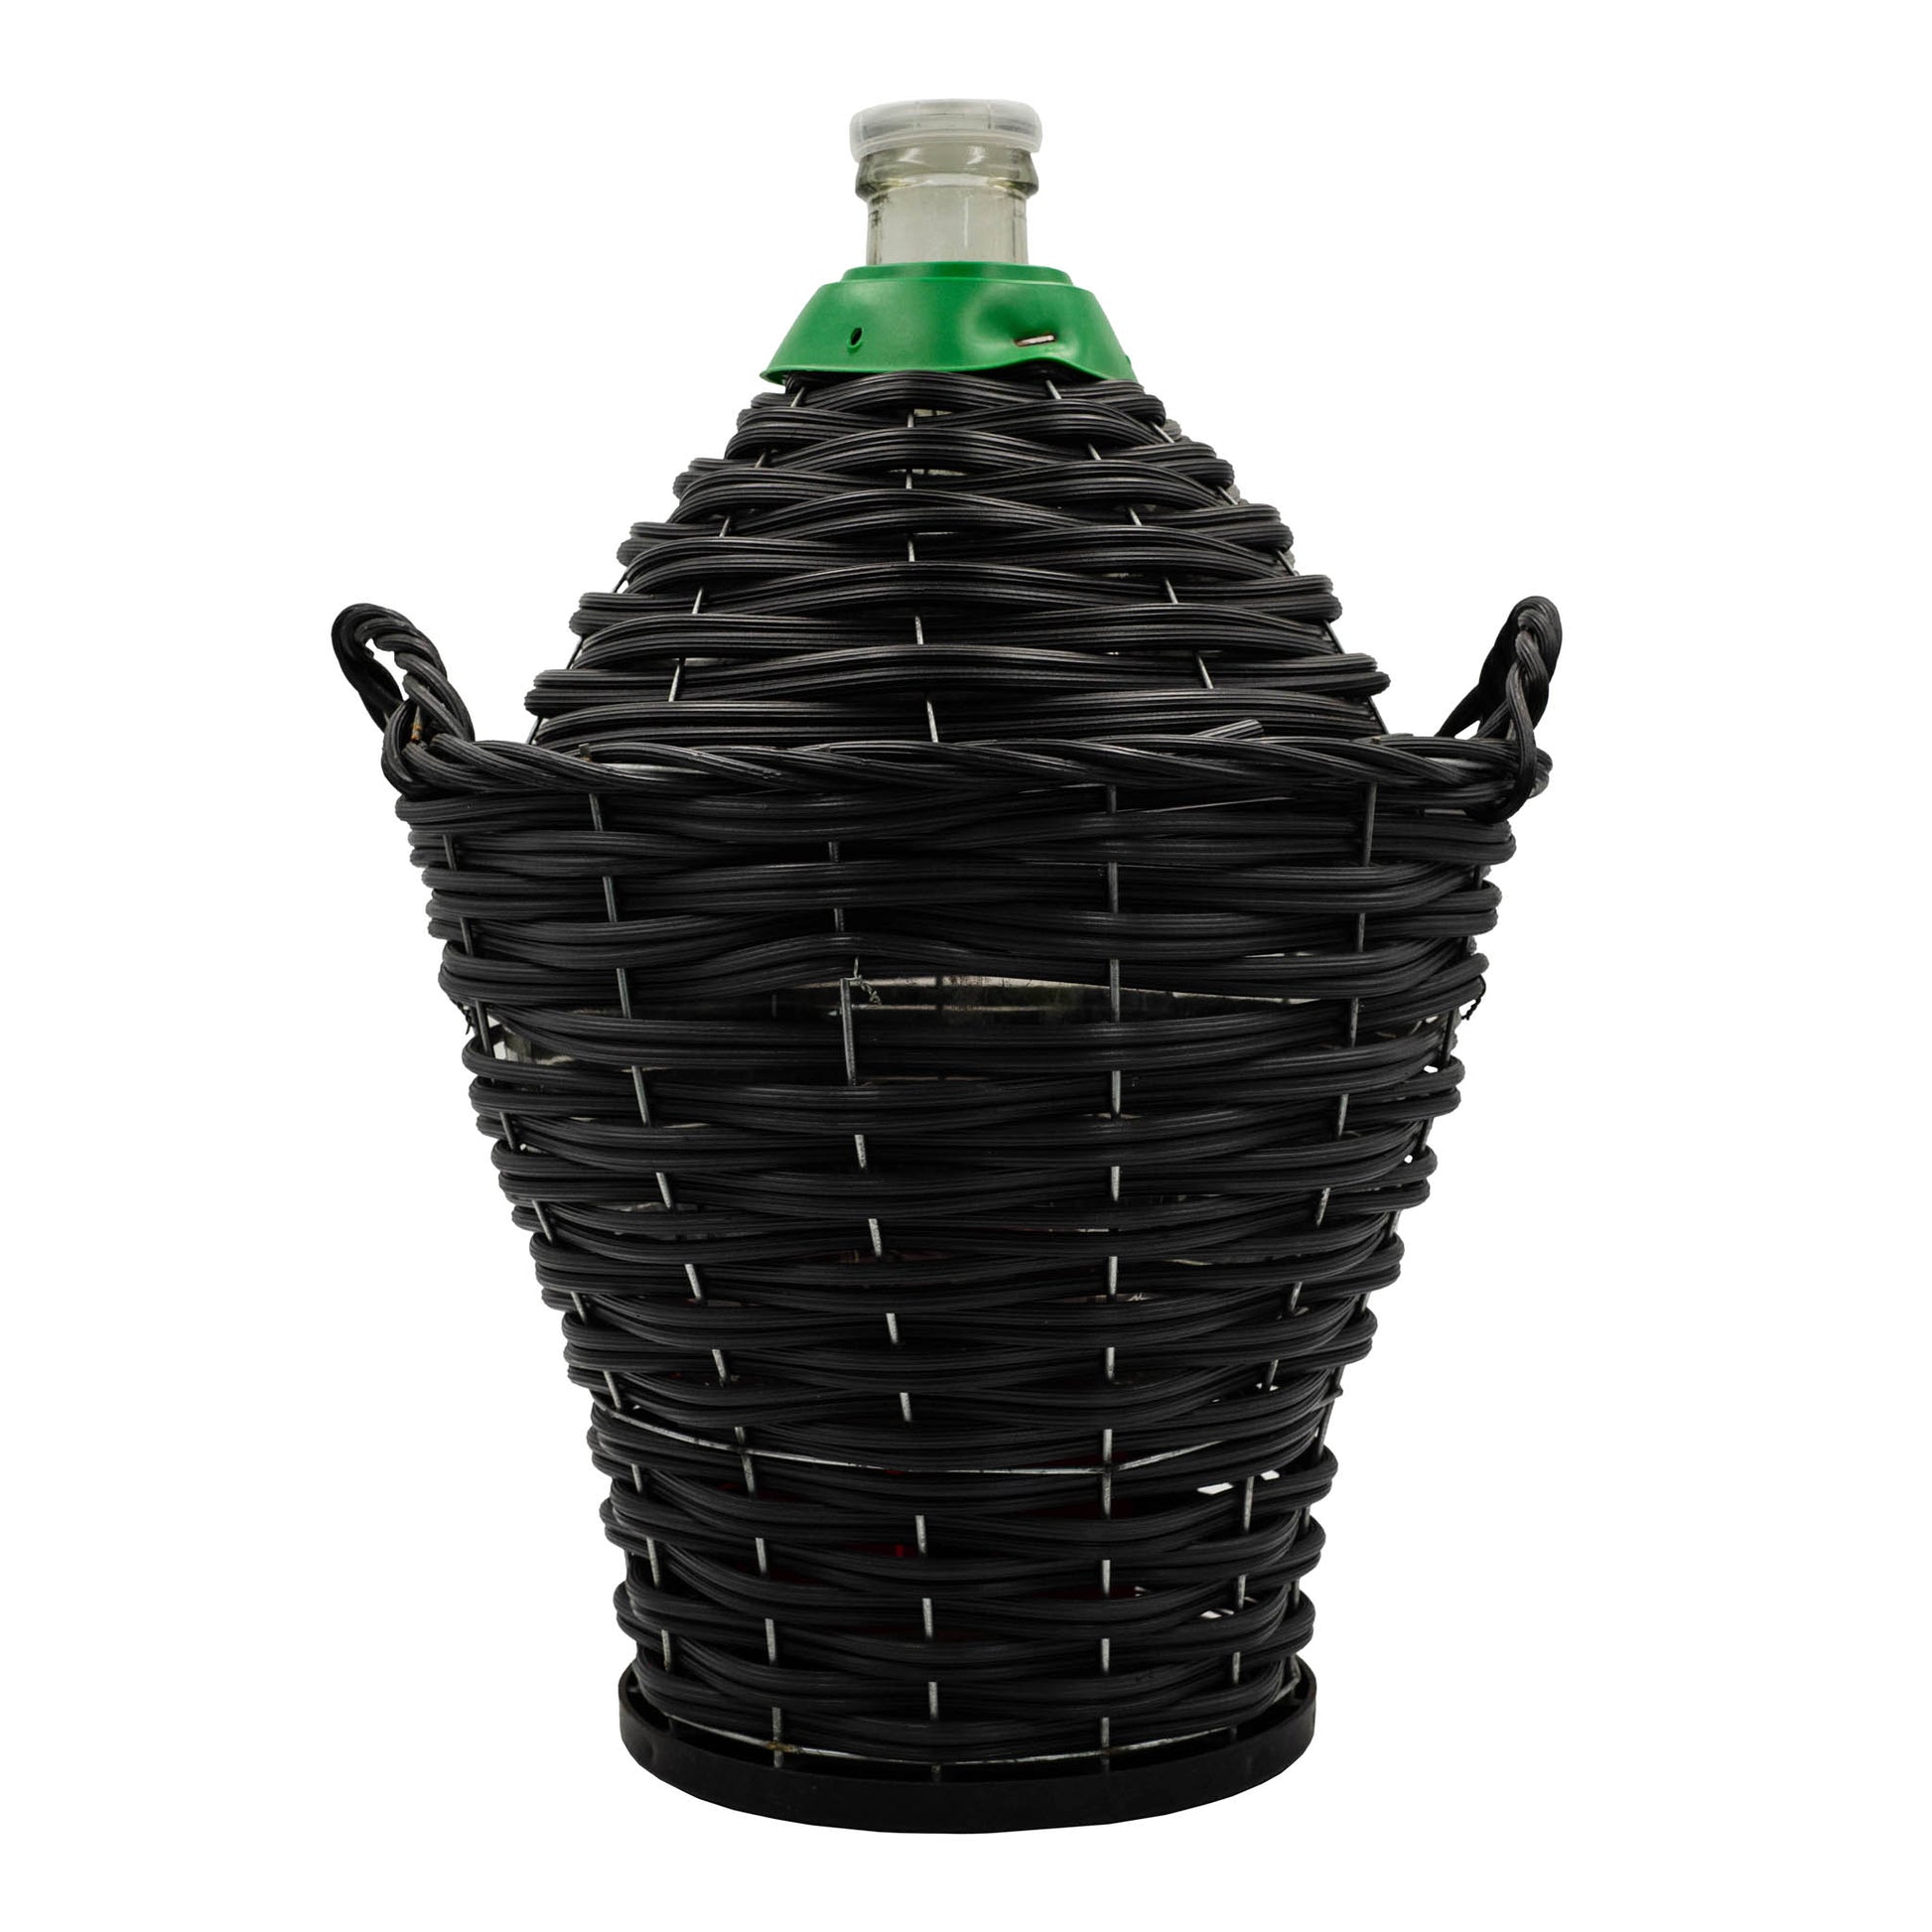 54 litre narrow neck demijohn with heavy weave basket for fermenting and storing wine. 